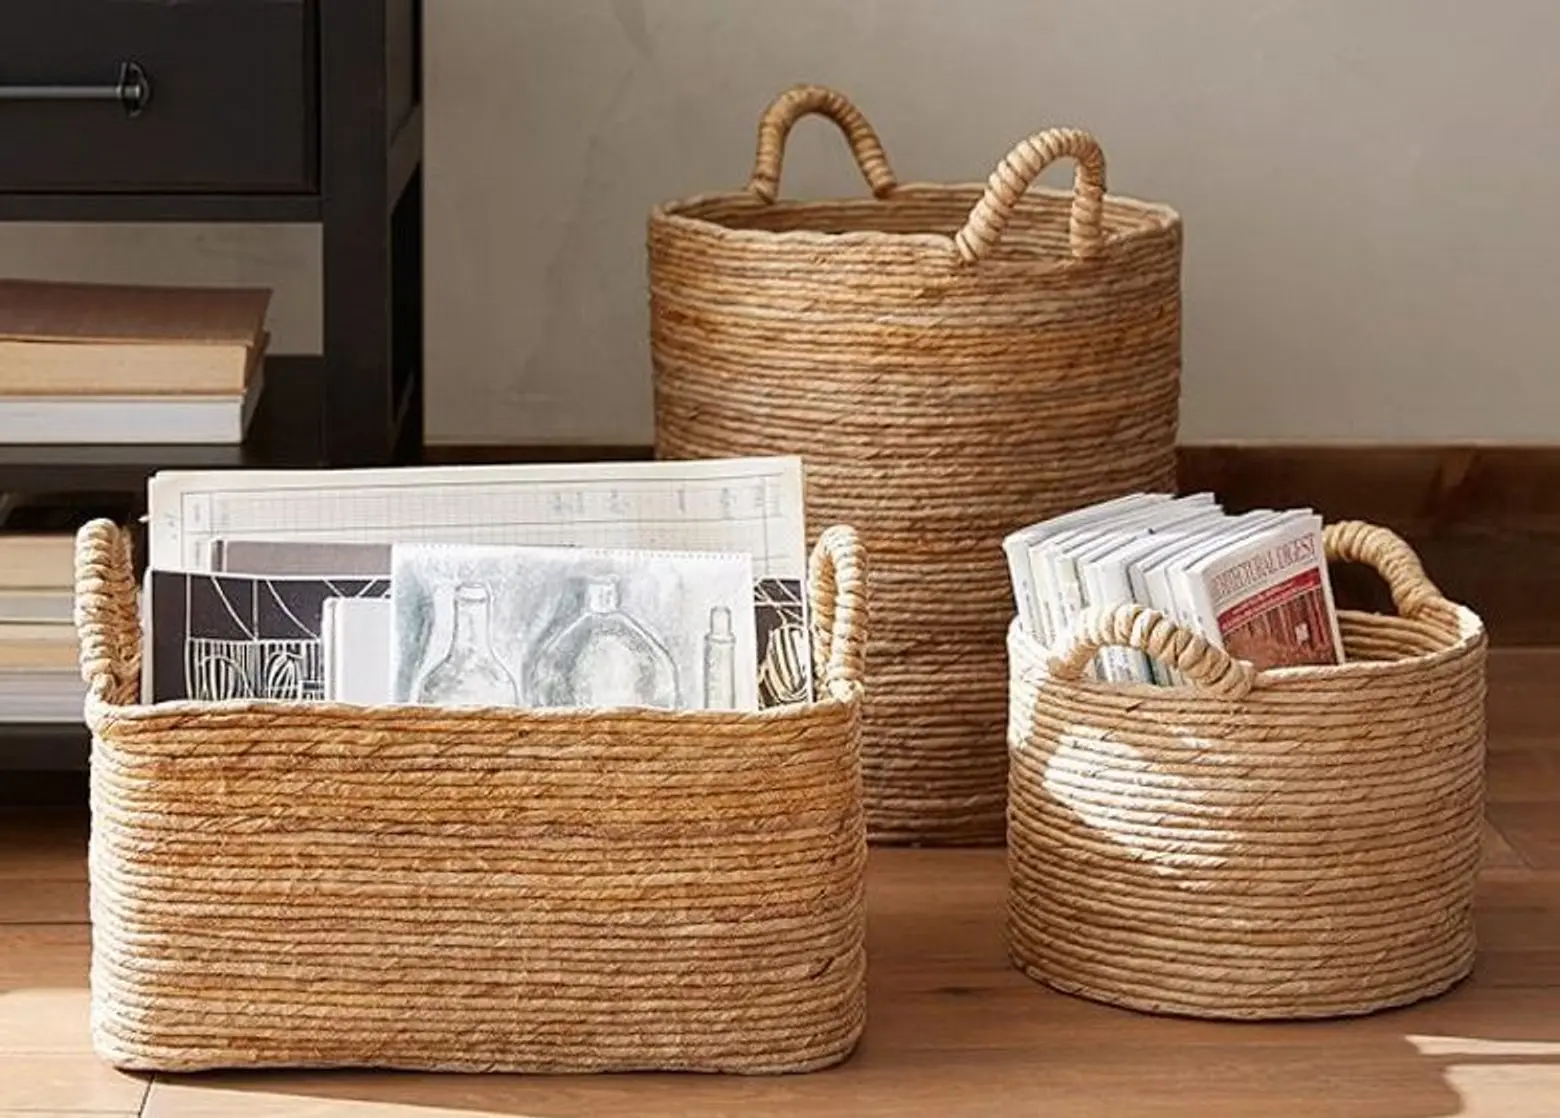 20 Cozy Basket Storage Ideas For Every Home - Shelterness